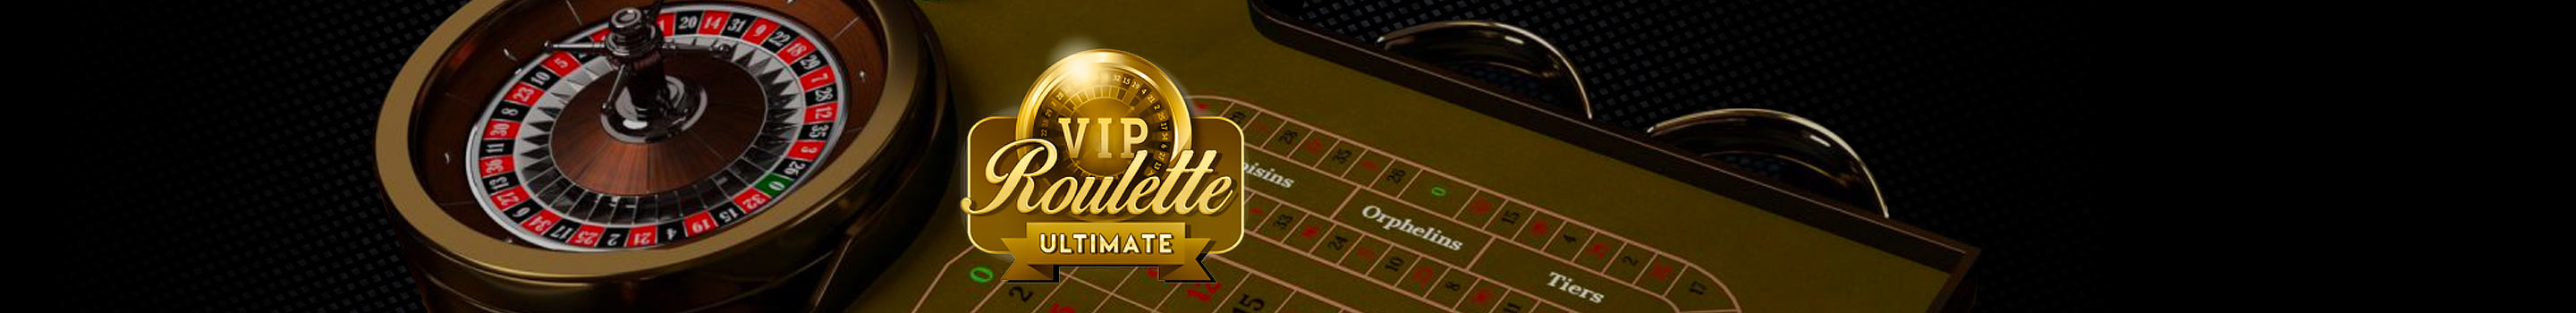 Vip roulette review